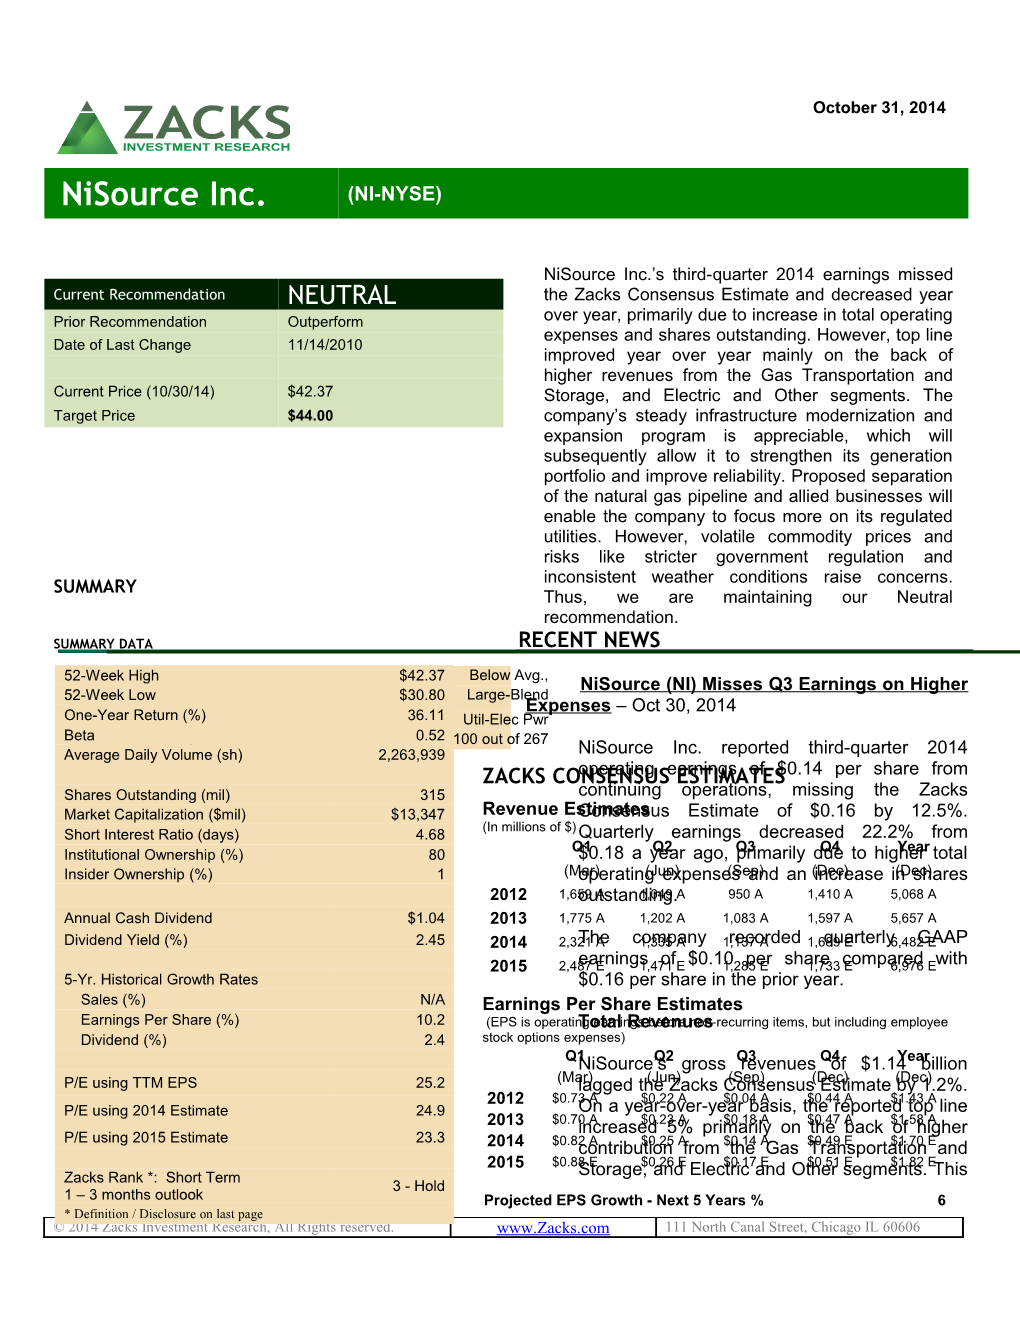 Nisource (NI) Misses Q3 Earnings on Higher Expenses Oct 30, 2014